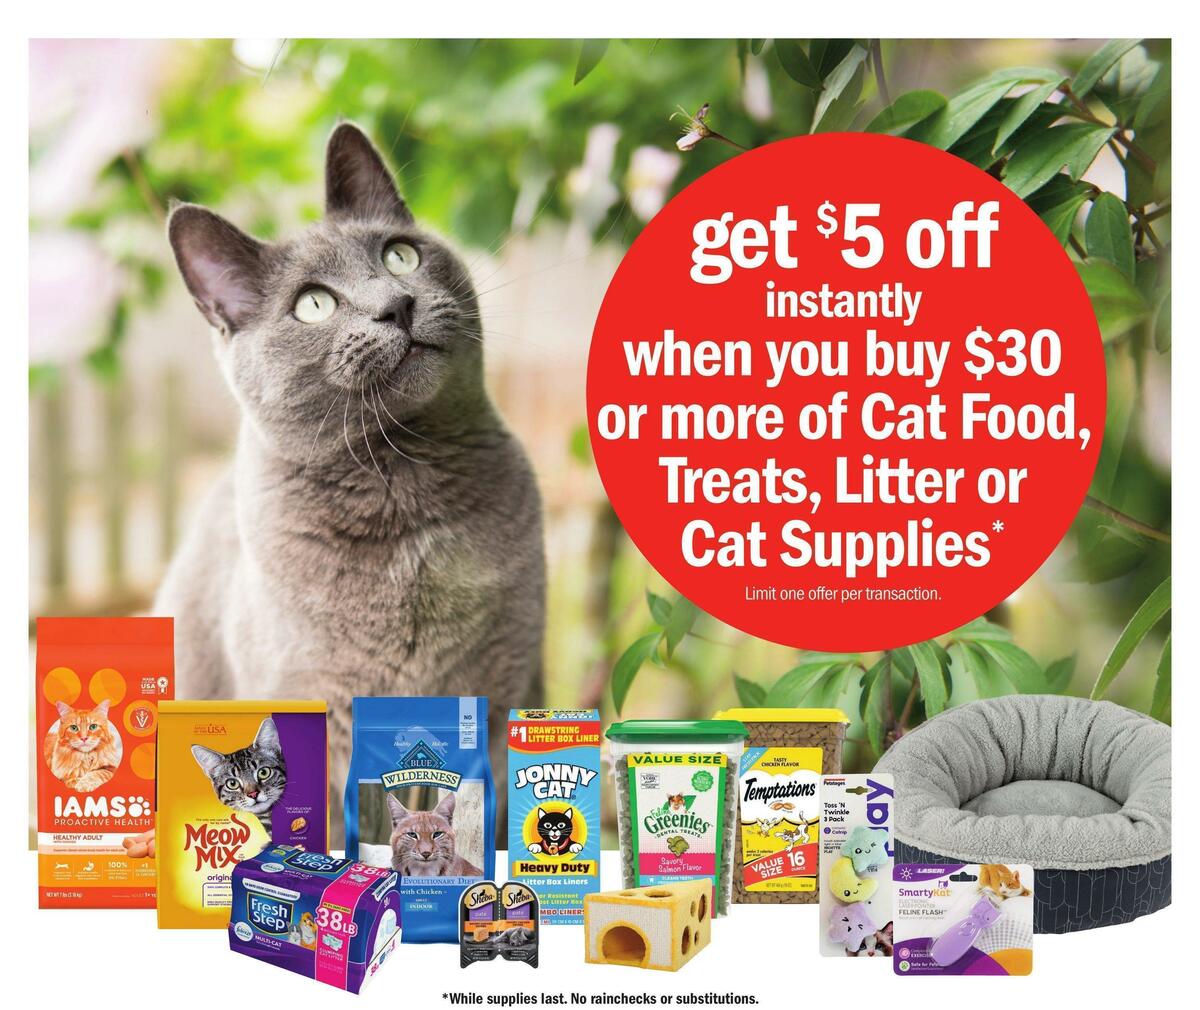 Meijer Pets Weekly Ad from August 7